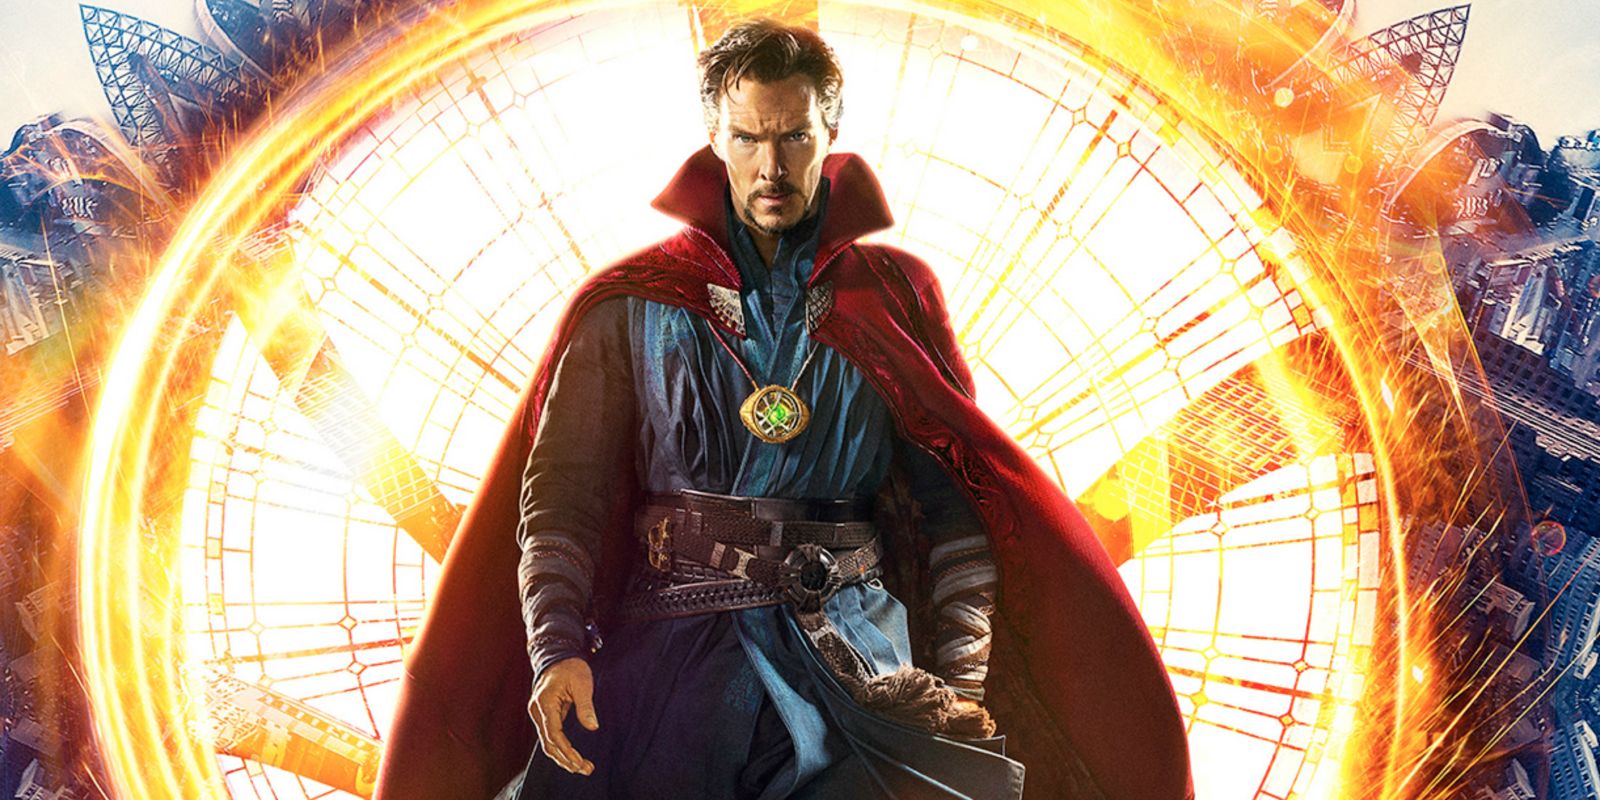 Doctor Strange Brings In Whopping $84 Million During Opening Weekend!